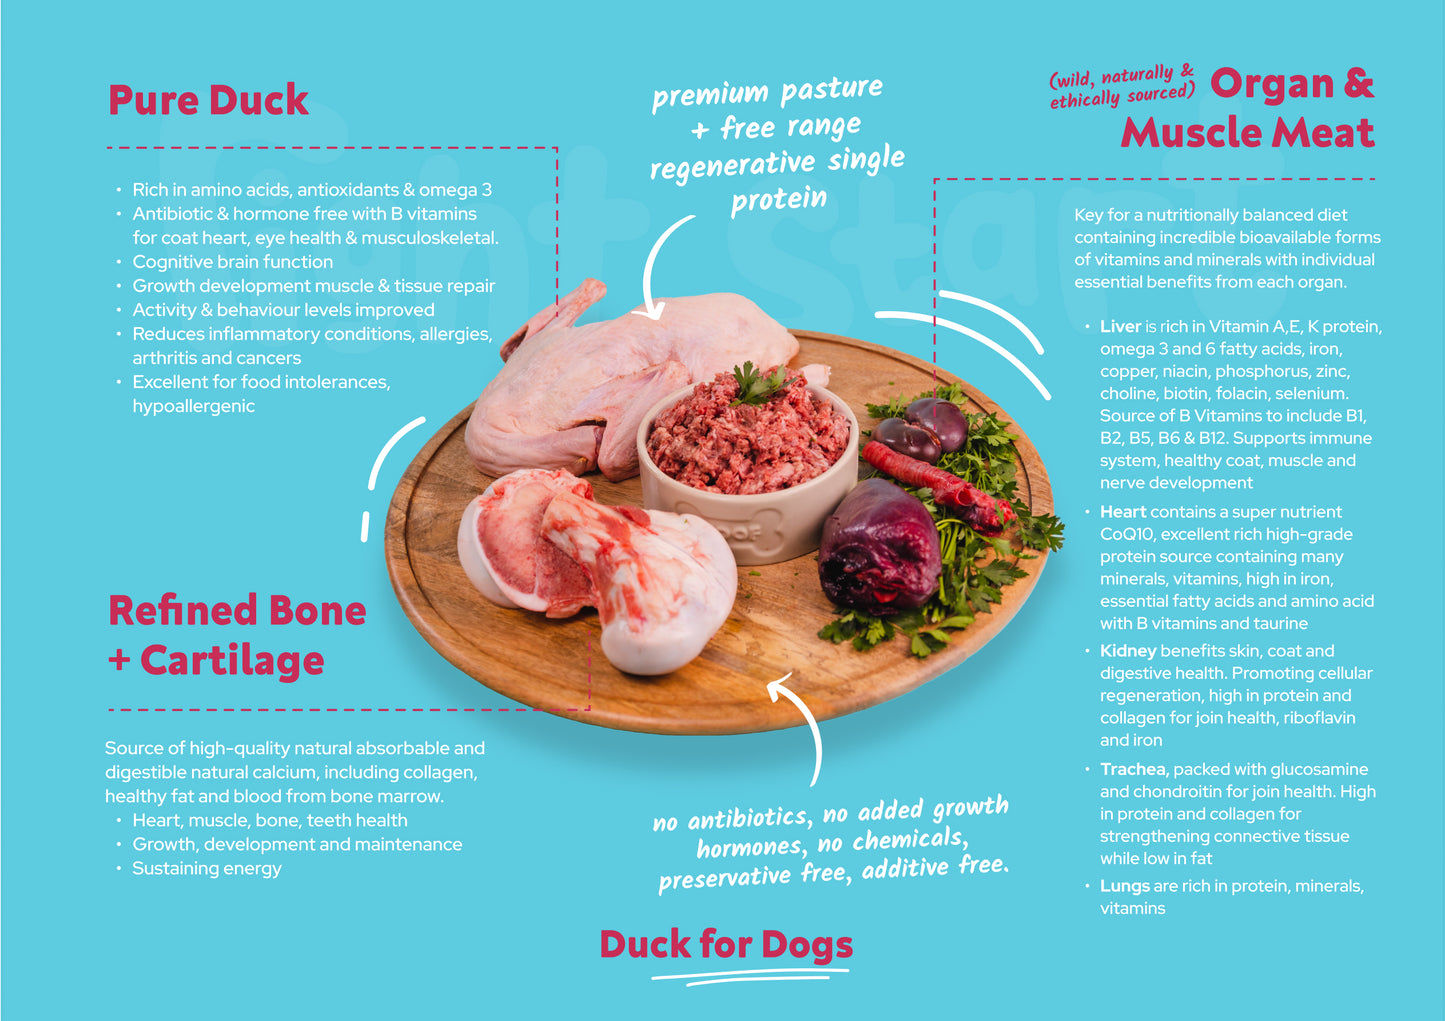 Duck Pieces for Dogs